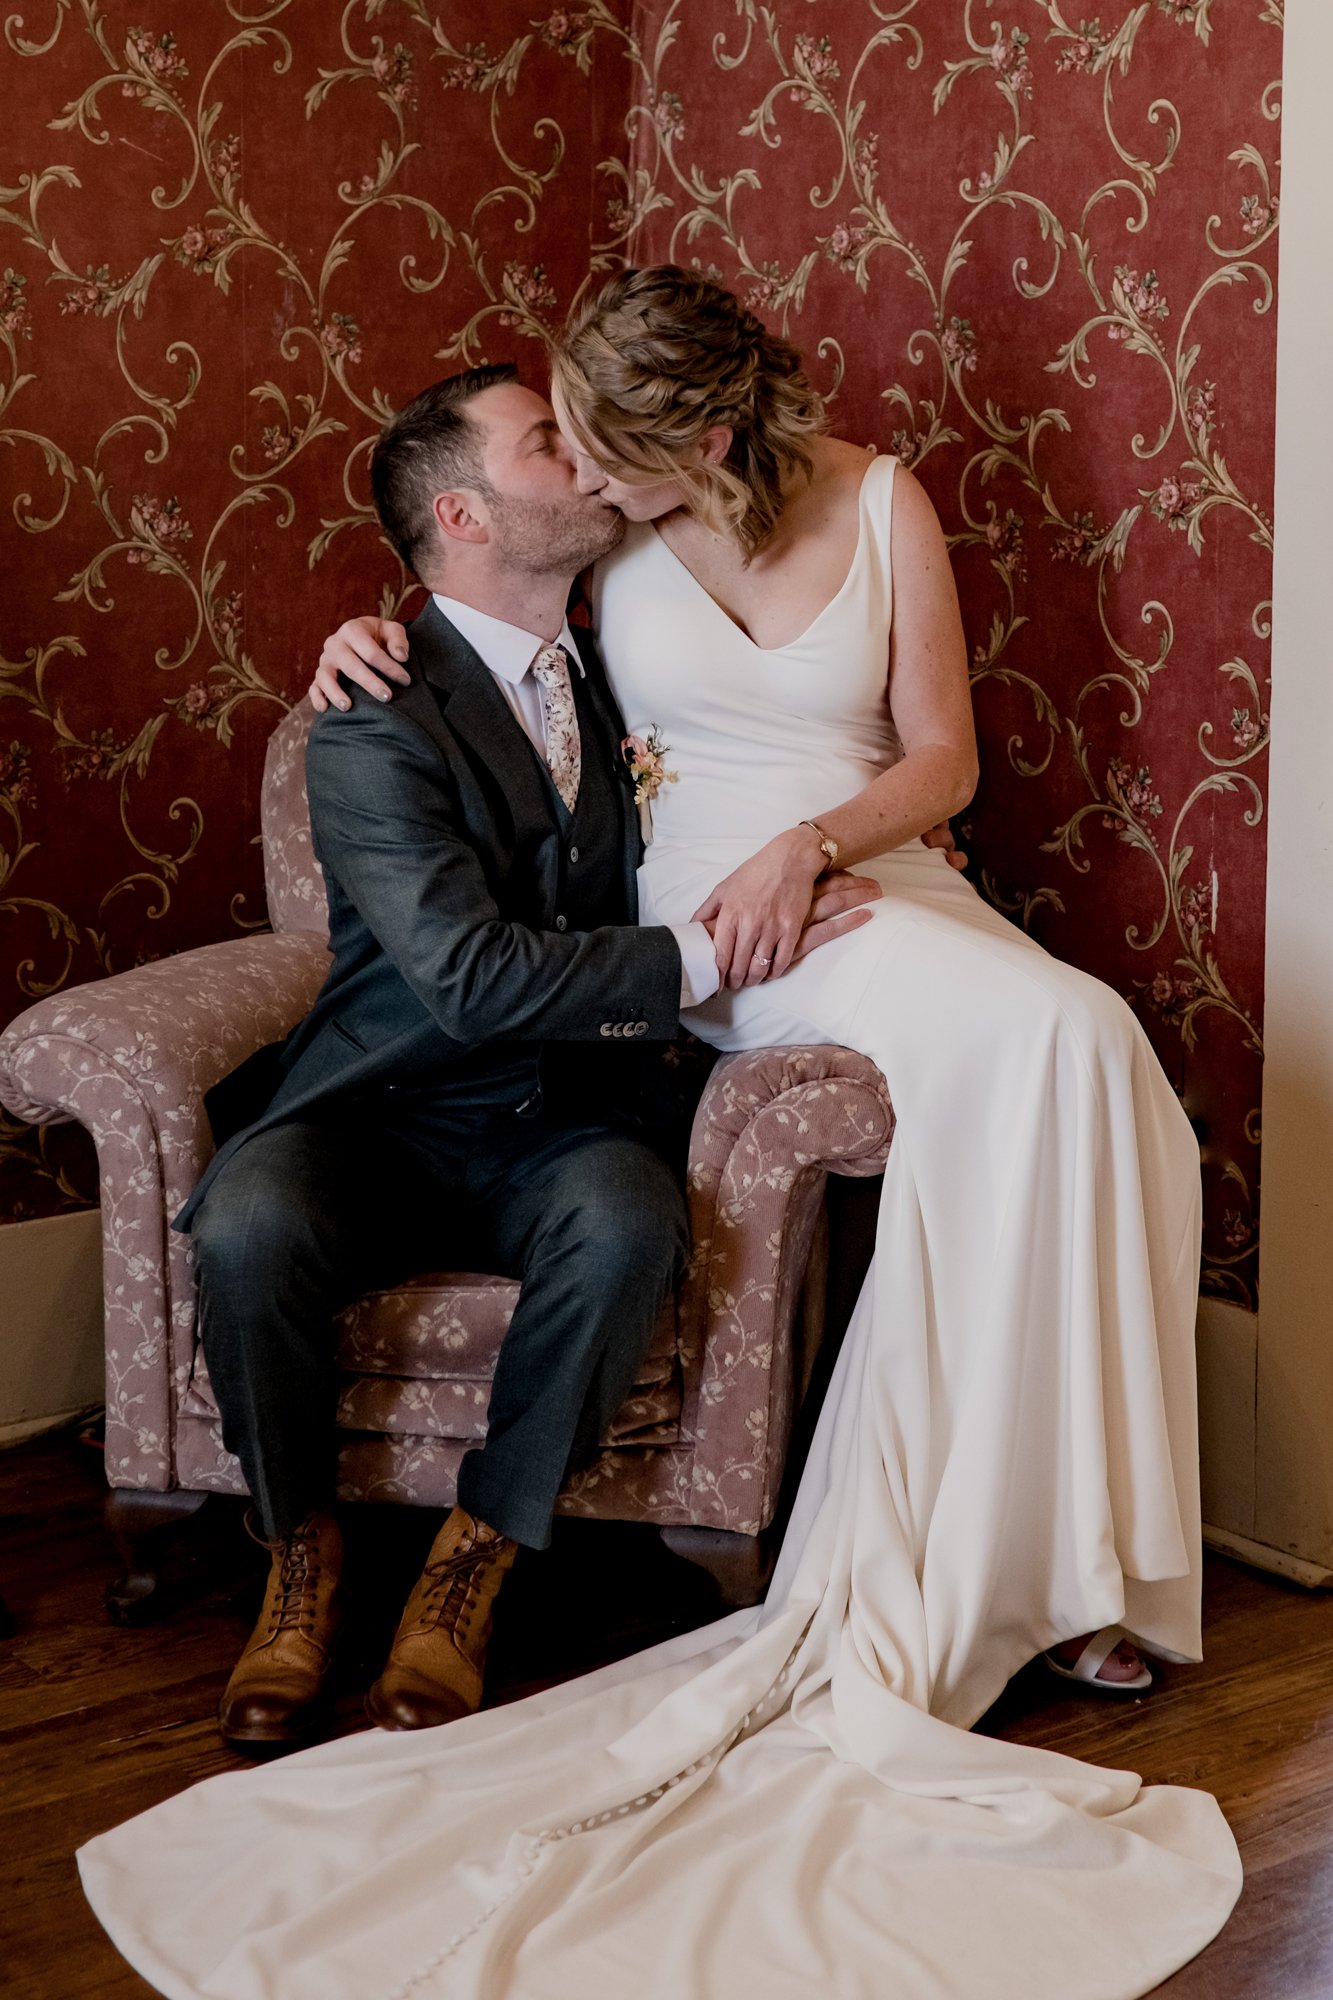 Bride and groom kissing in the armchair Wedding at Antique Rose Emporium